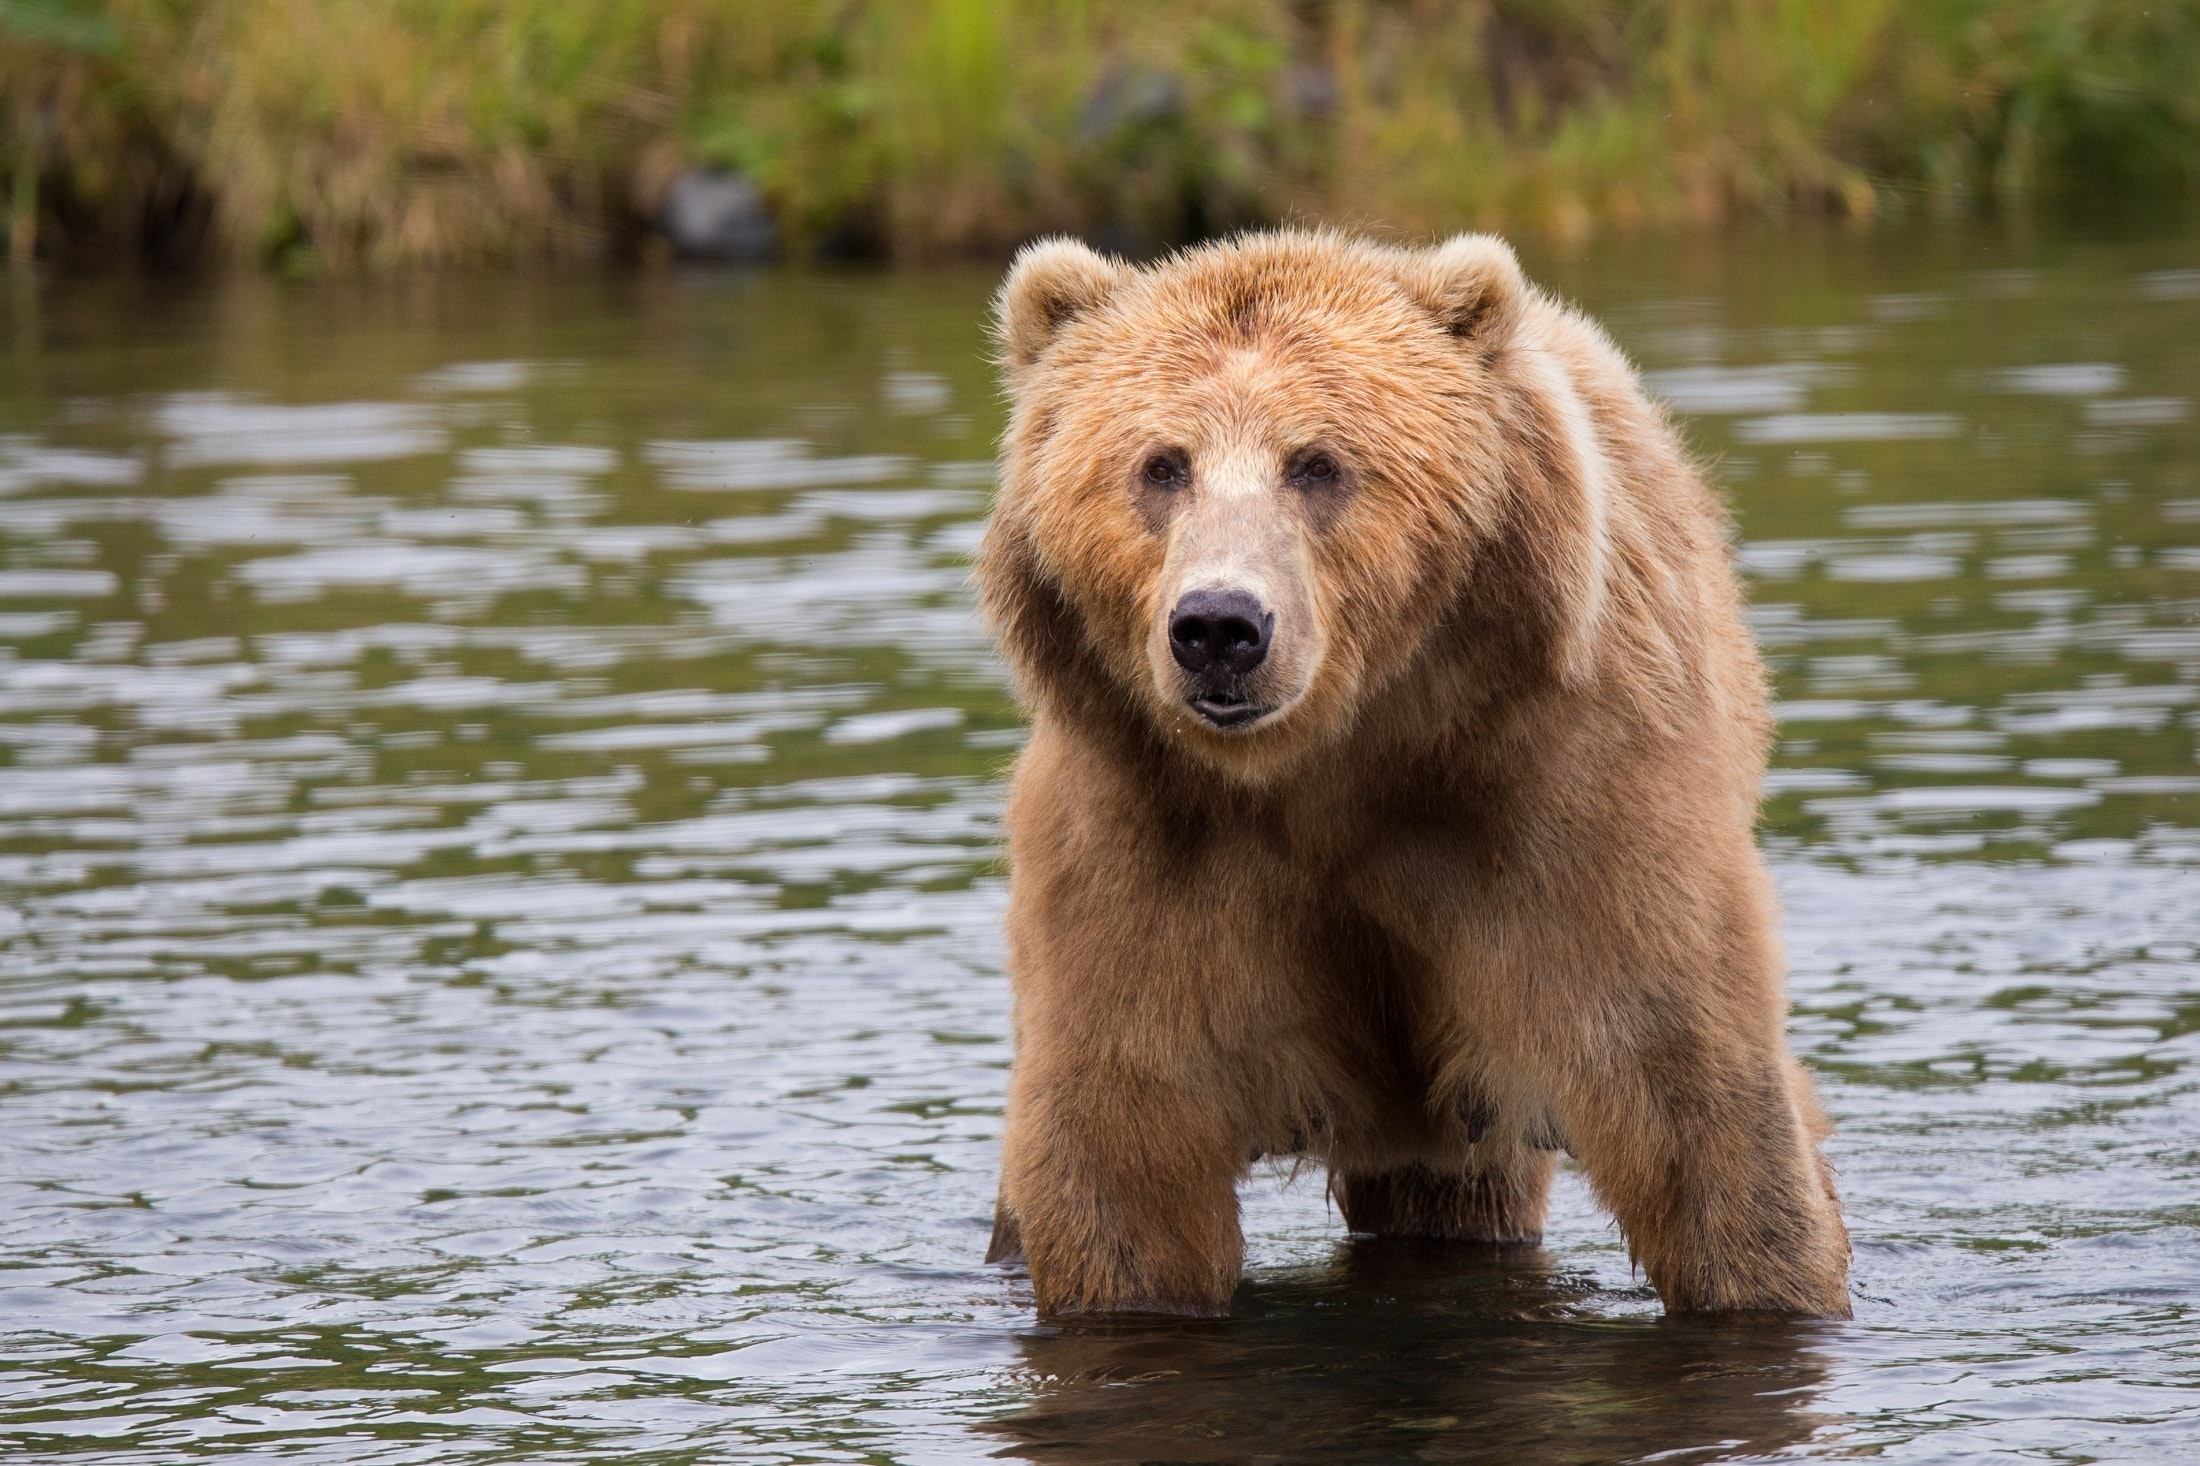 free to use (CC0),  Brown Bear on a Body of Water, https://www.pexels.com